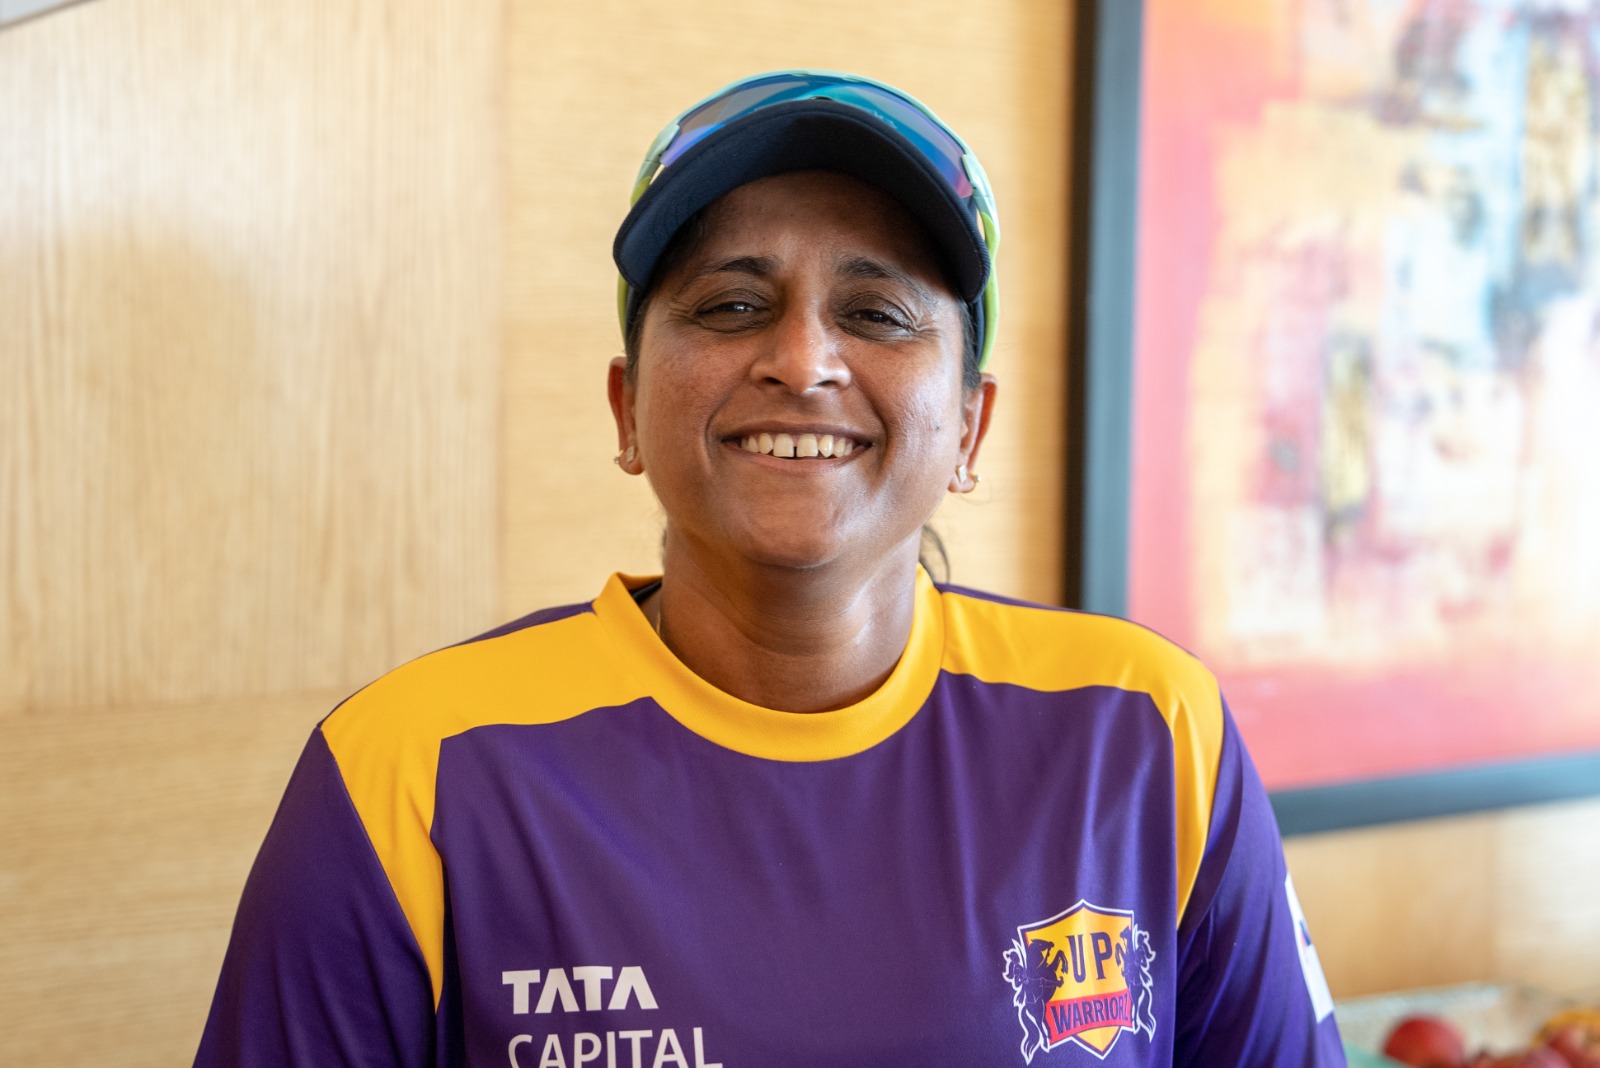 UP Warriorz Assistant Coach Anju Jain says WPL is a historical moment, will empower women across the nation